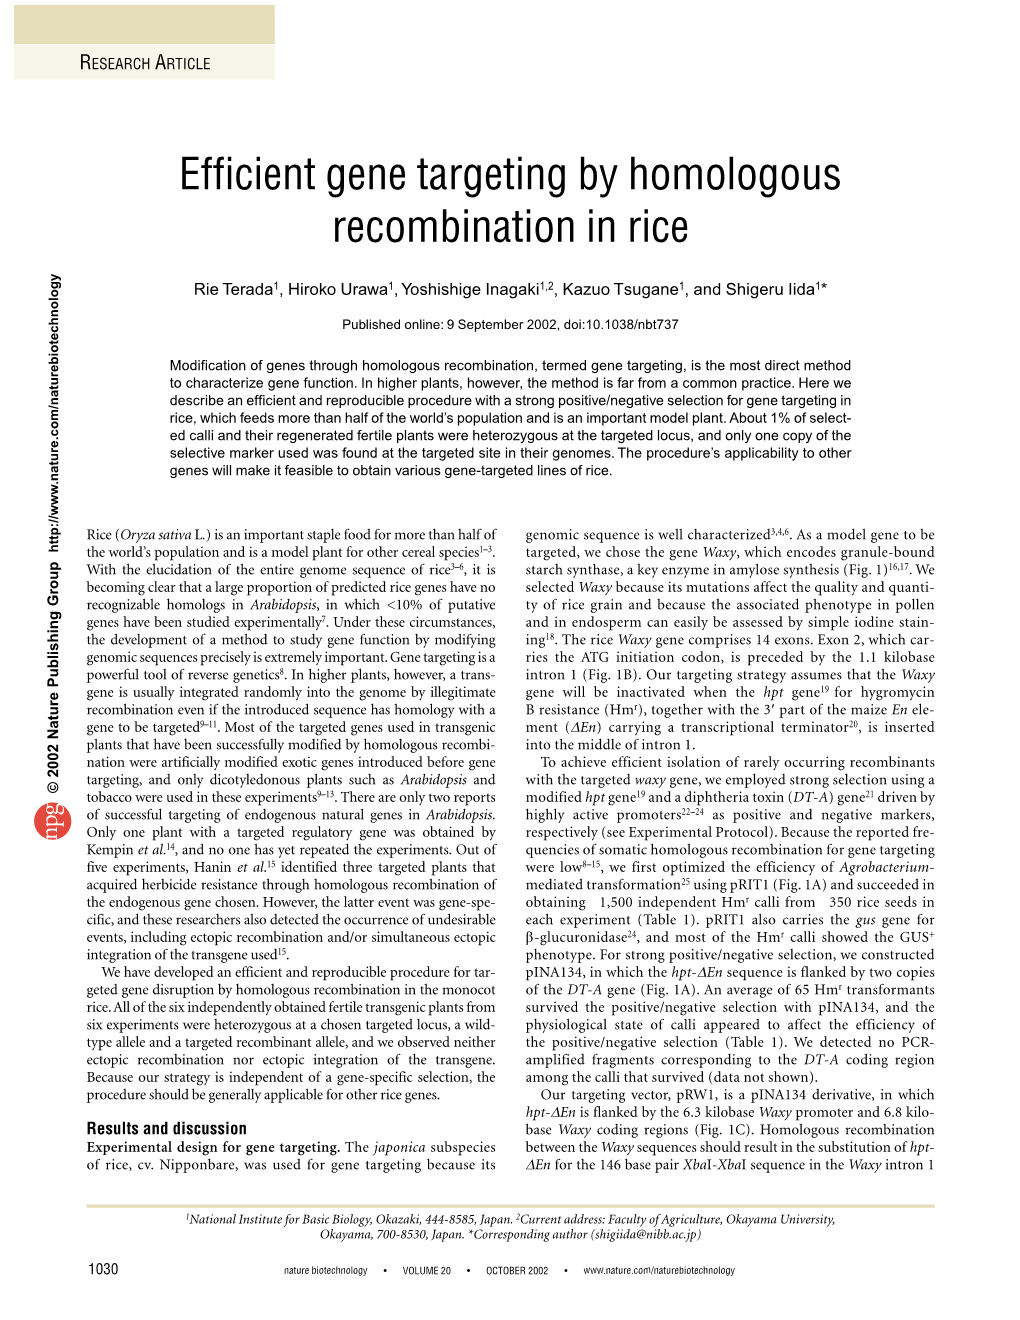 Efficient Gene Targeting by Homologous Recombination in Rice